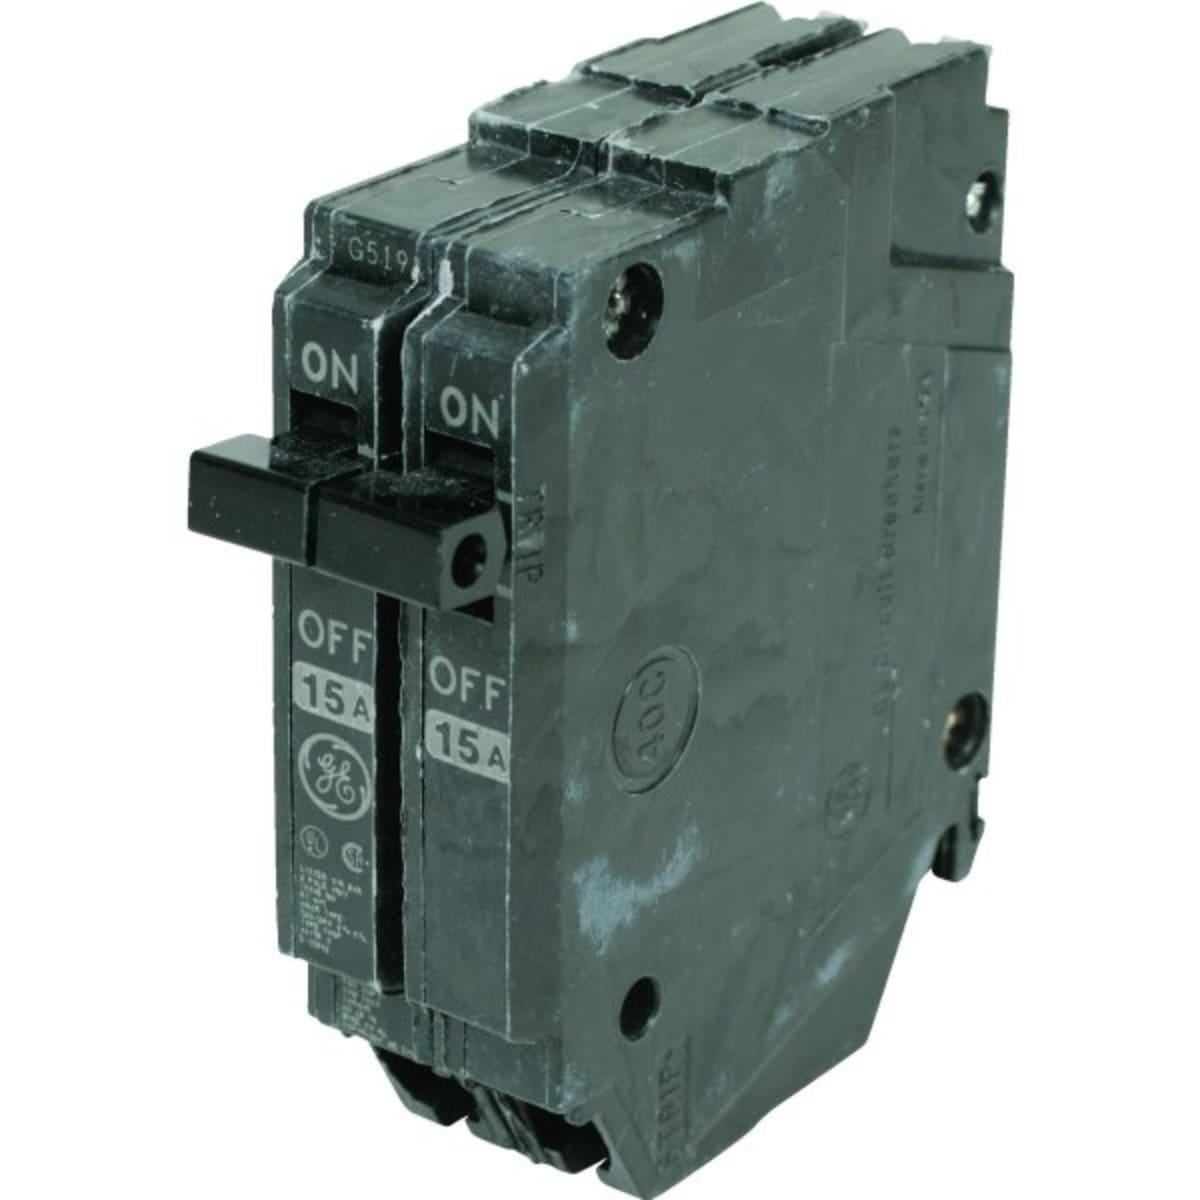 * GENERAL ELECTRIC  40 AMP 2 POLE CIRCUIT BREAKER   TYPE THQP THQP240    F-208